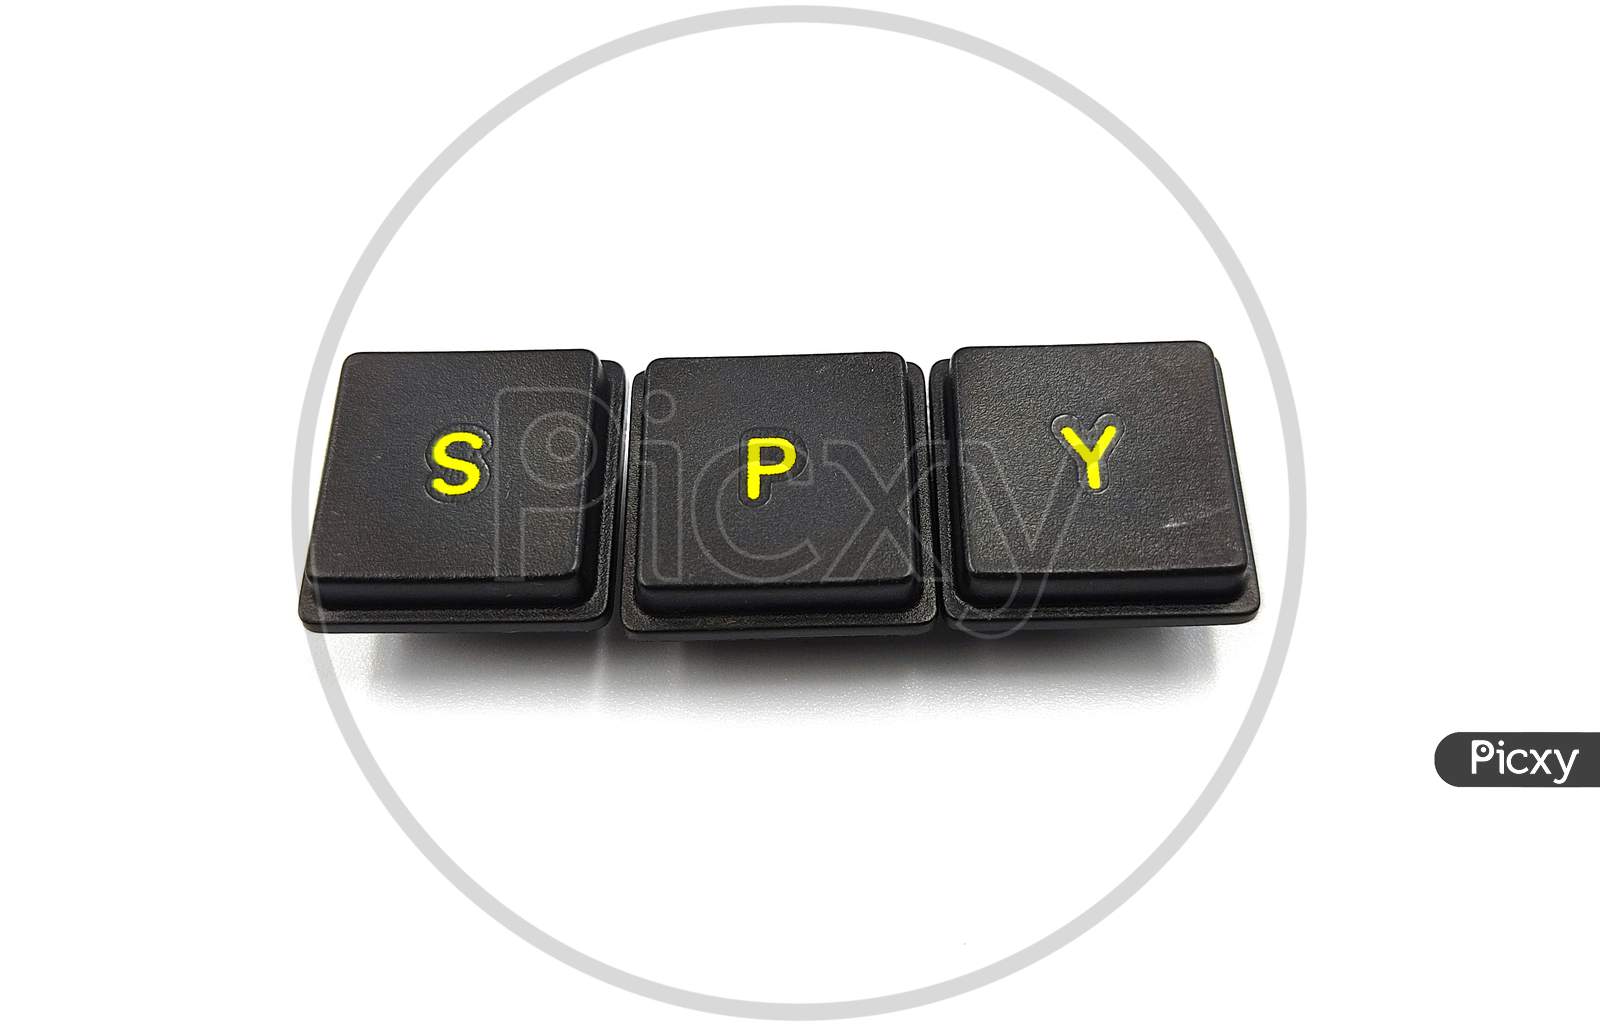 Spy word written with computer buttons